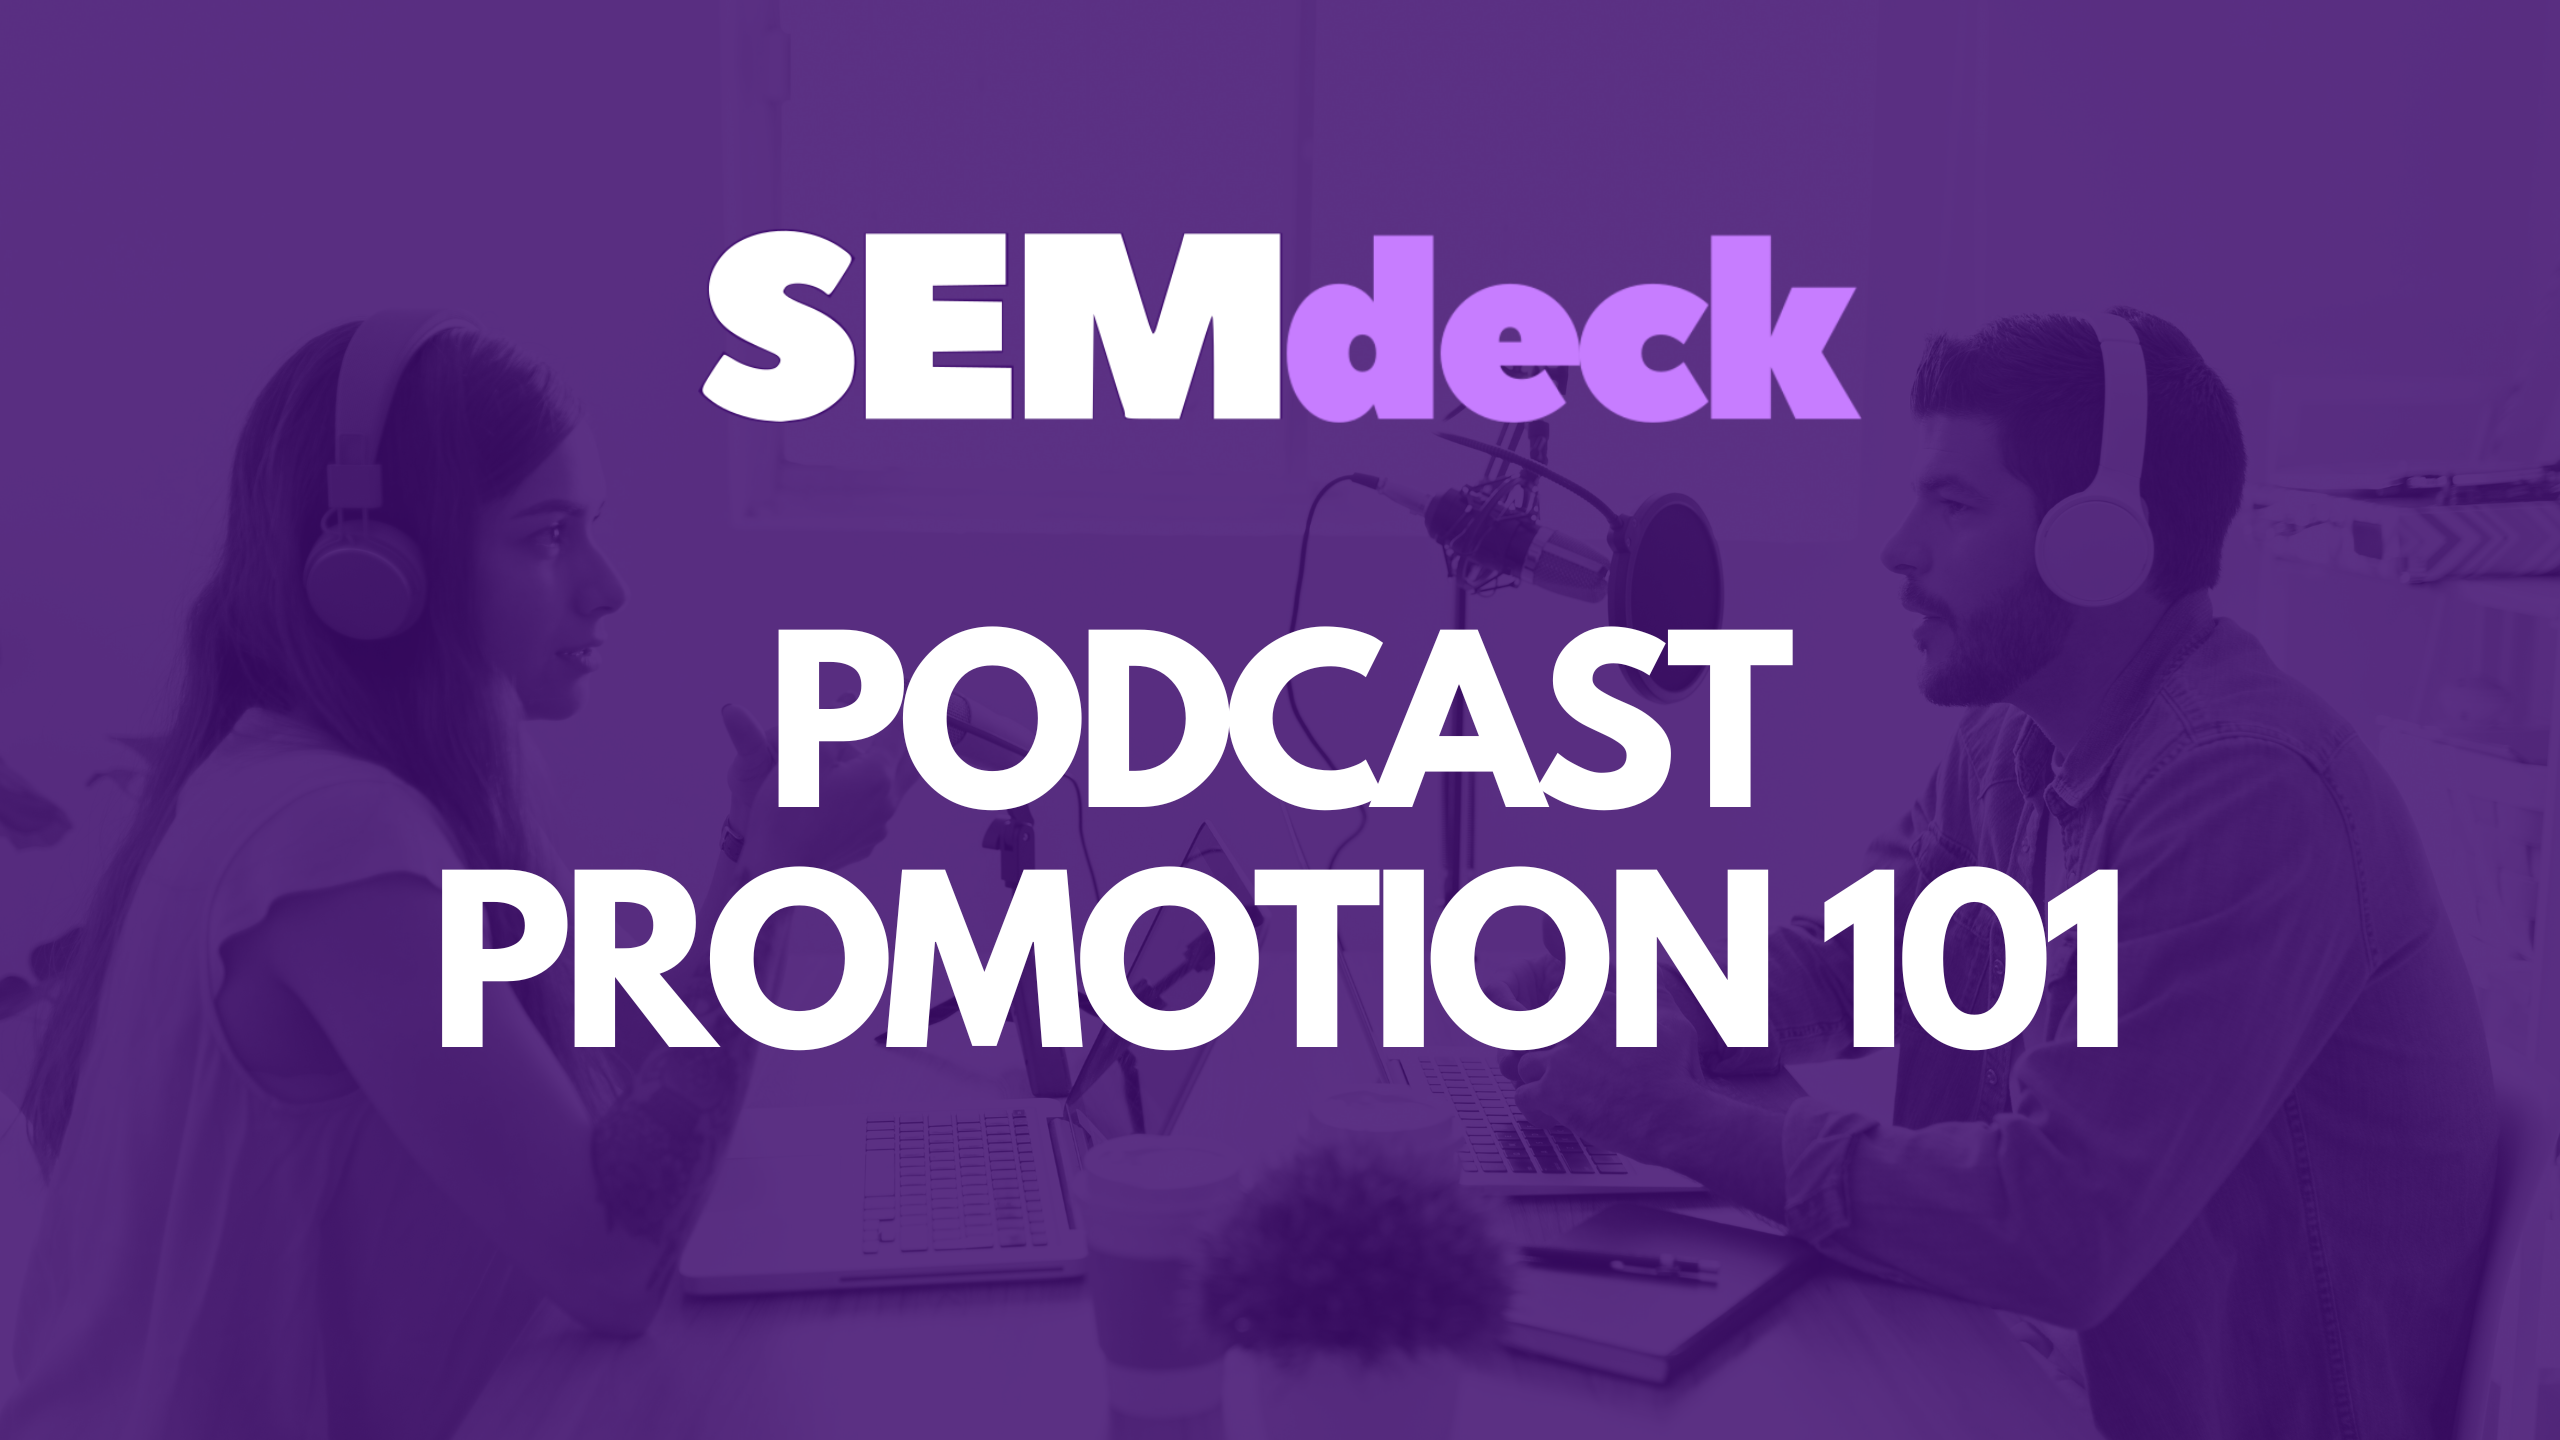 How to promote your podcast effectively